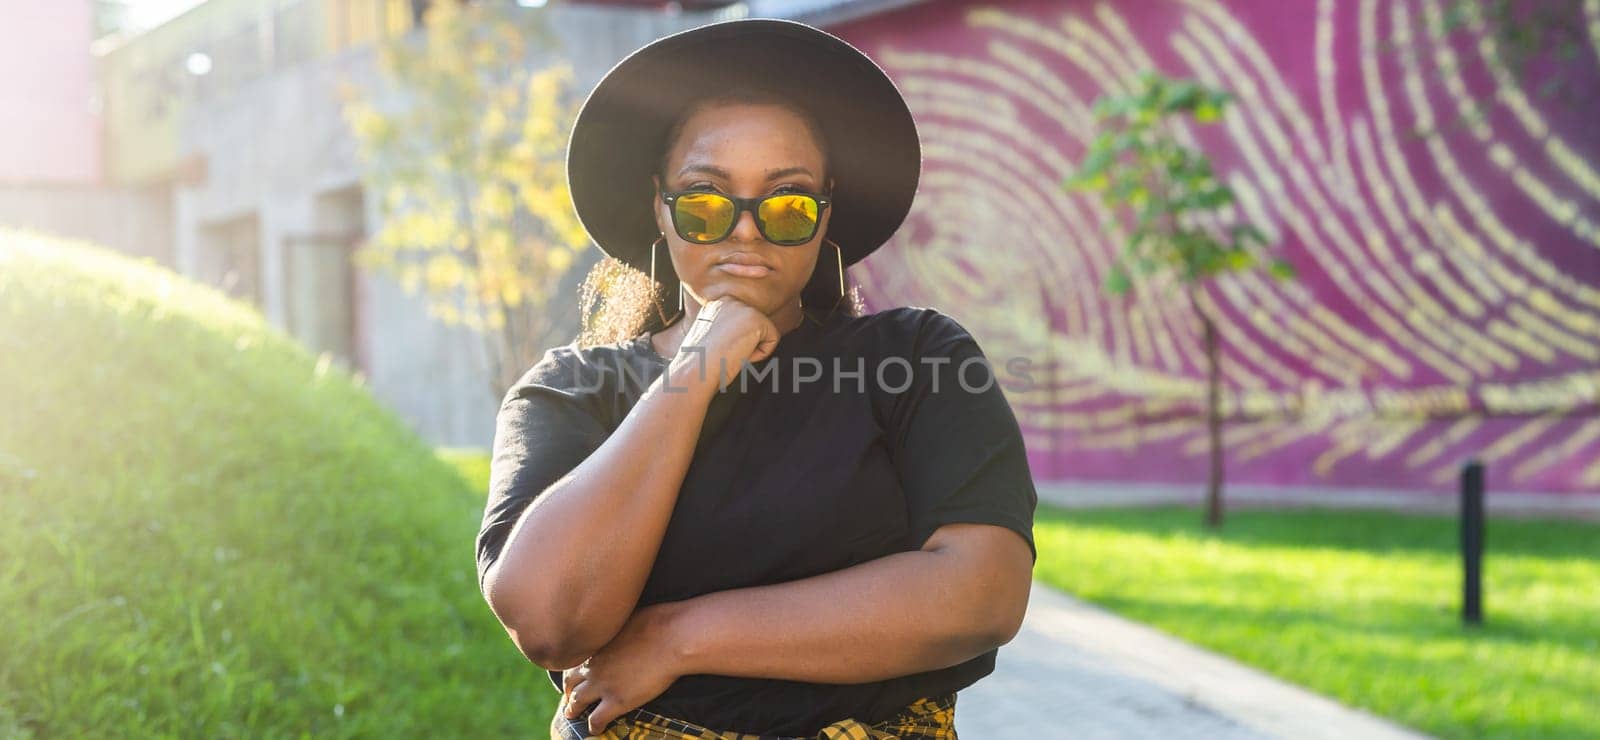 African american woman in an urban city area. Smiling generation z or millennial hipster girl posing outdoor backlit with sunlight portrait copy space by Satura86